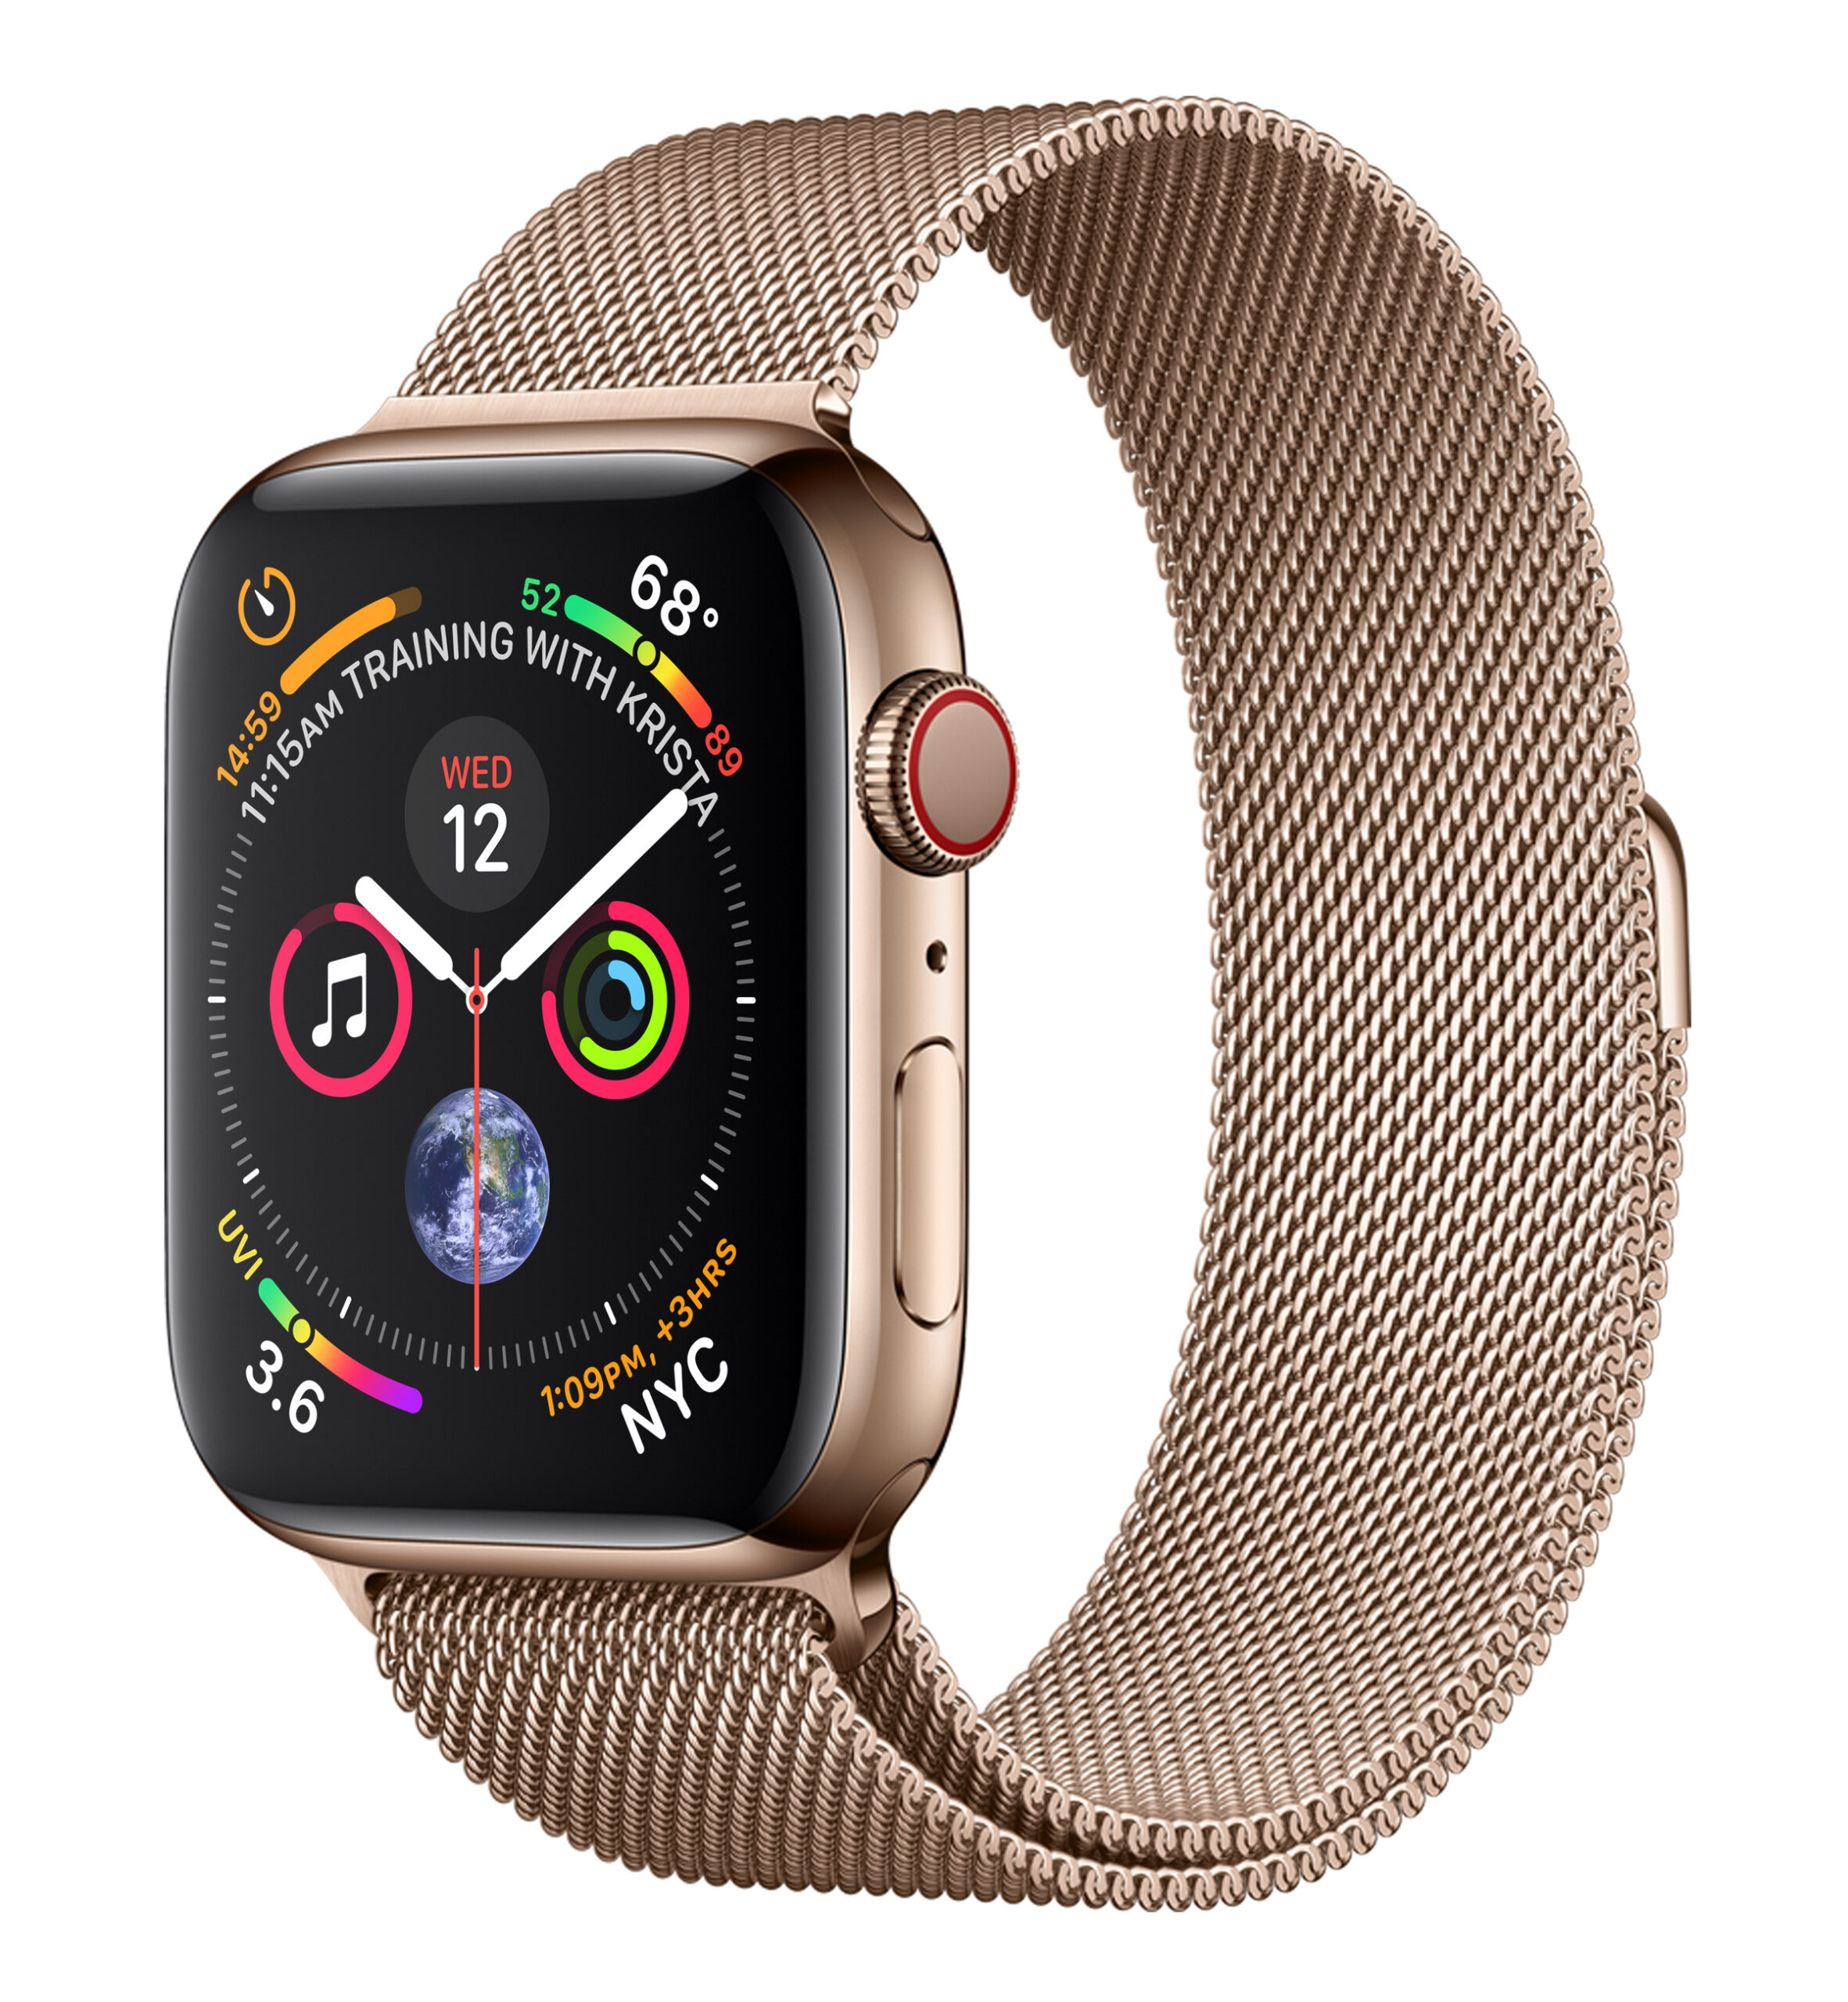 MTV82LL/A - $347 - Apple Watch Series 4 (GPS + Cellular, 44mm, Gold Stainless Steel, Gold 